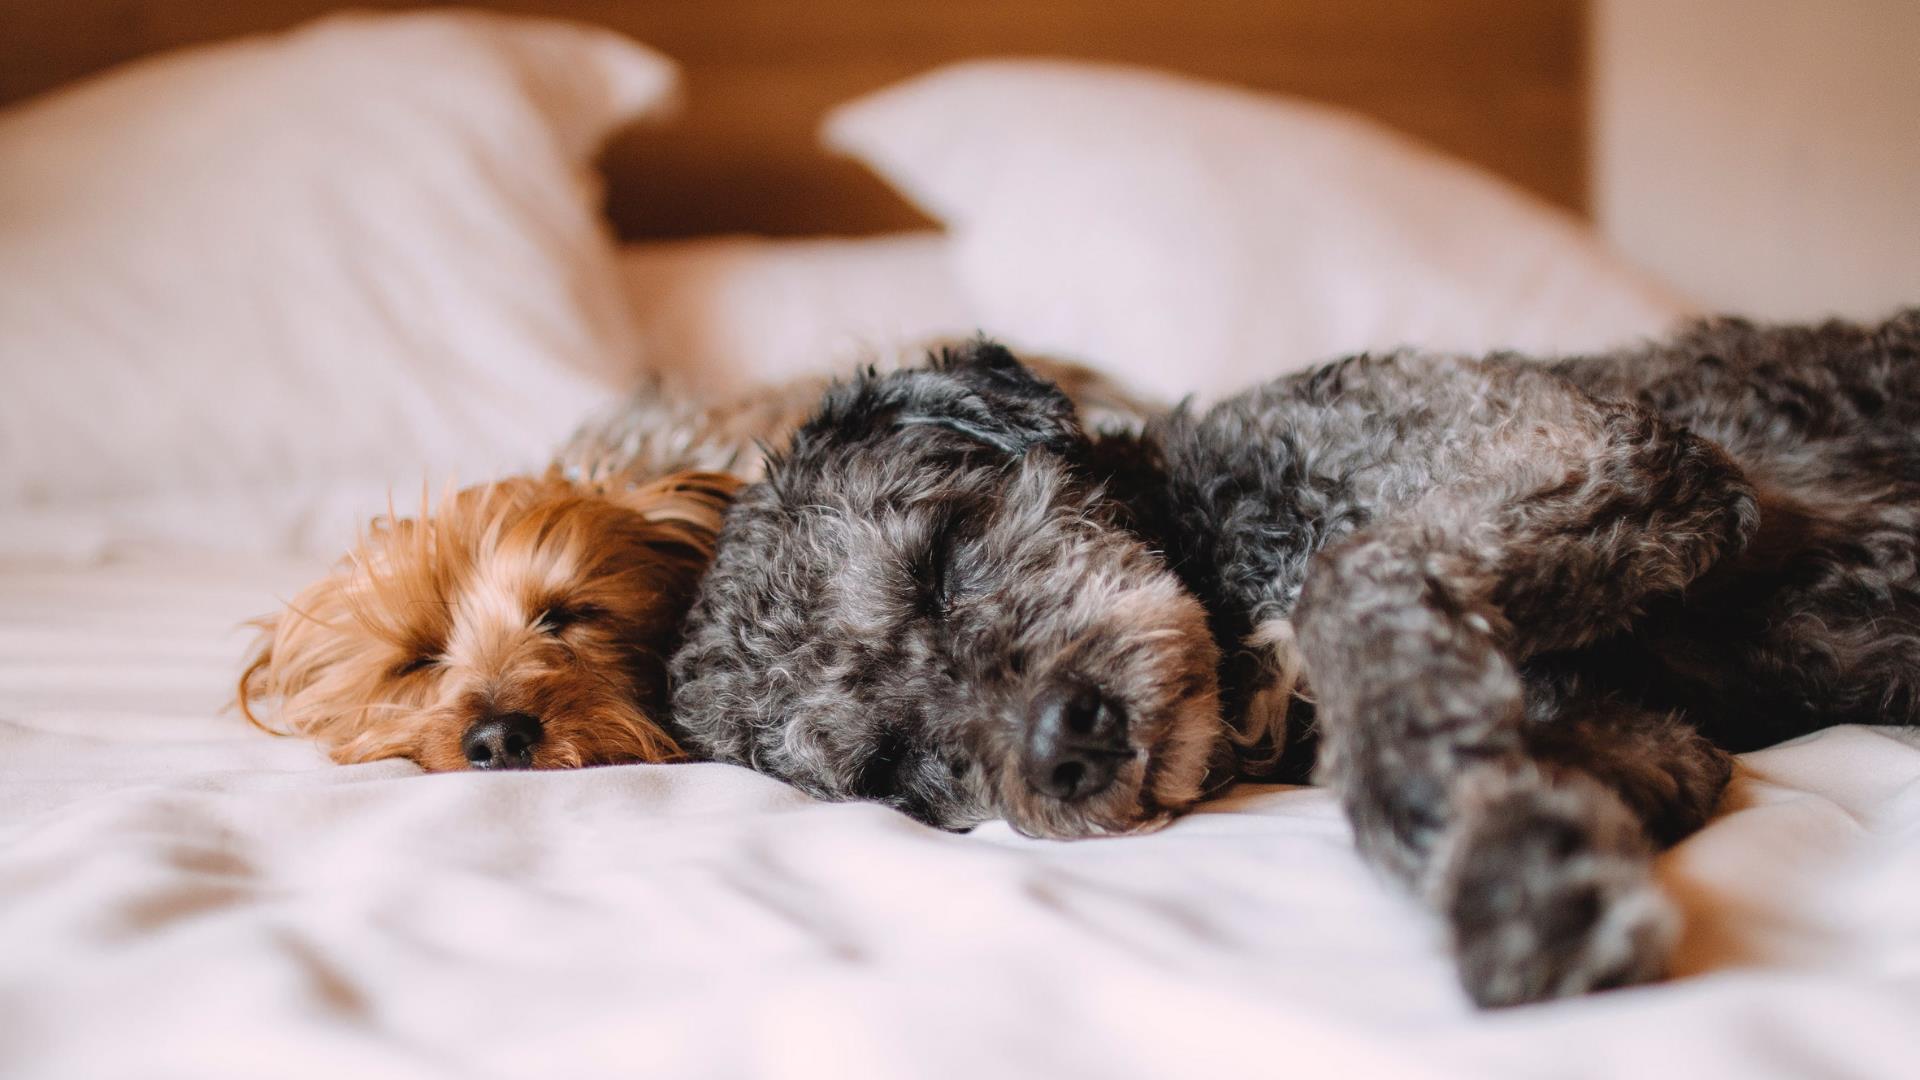 Two dogs snuggle up in a pet friendly hotel bed in Greenwich, London.